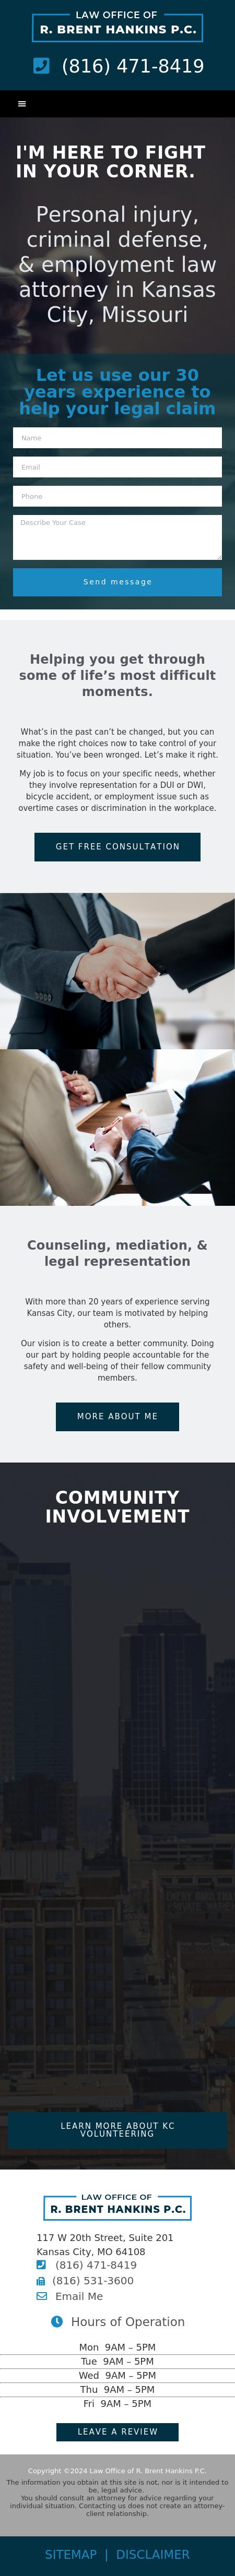 Law Office of R. Brent Hankins P.C. - Kansas City MO Lawyers